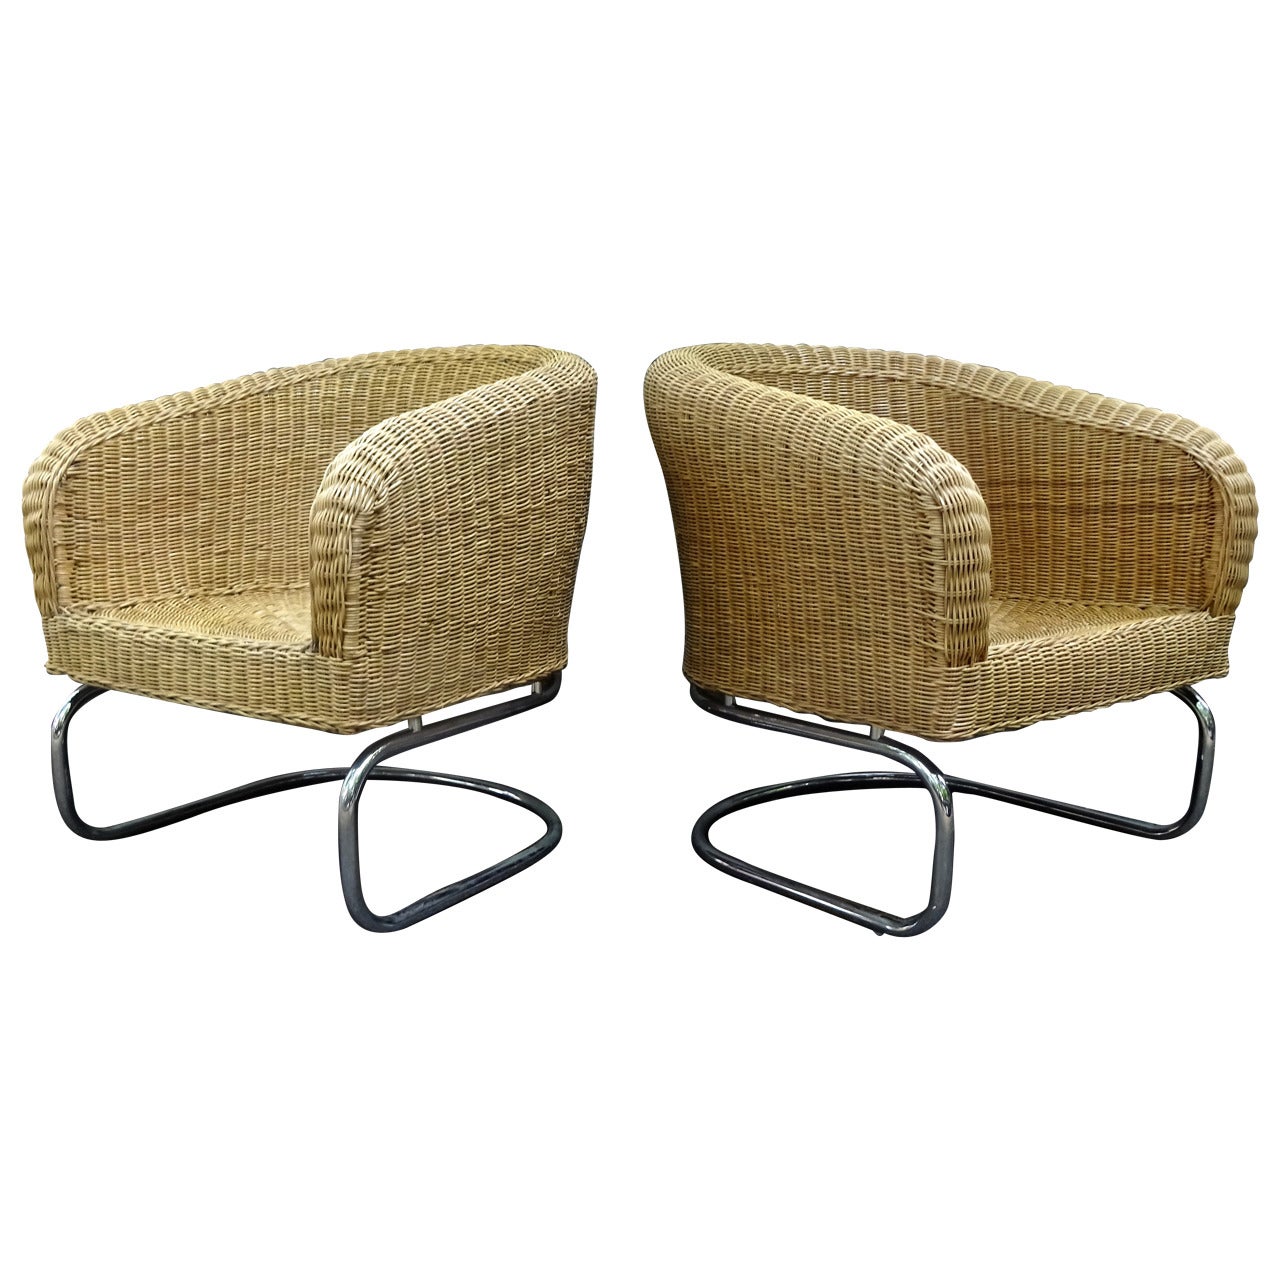 Fabulous Pair of 1970s Italian Wicker and Chrome Lounge Chairs